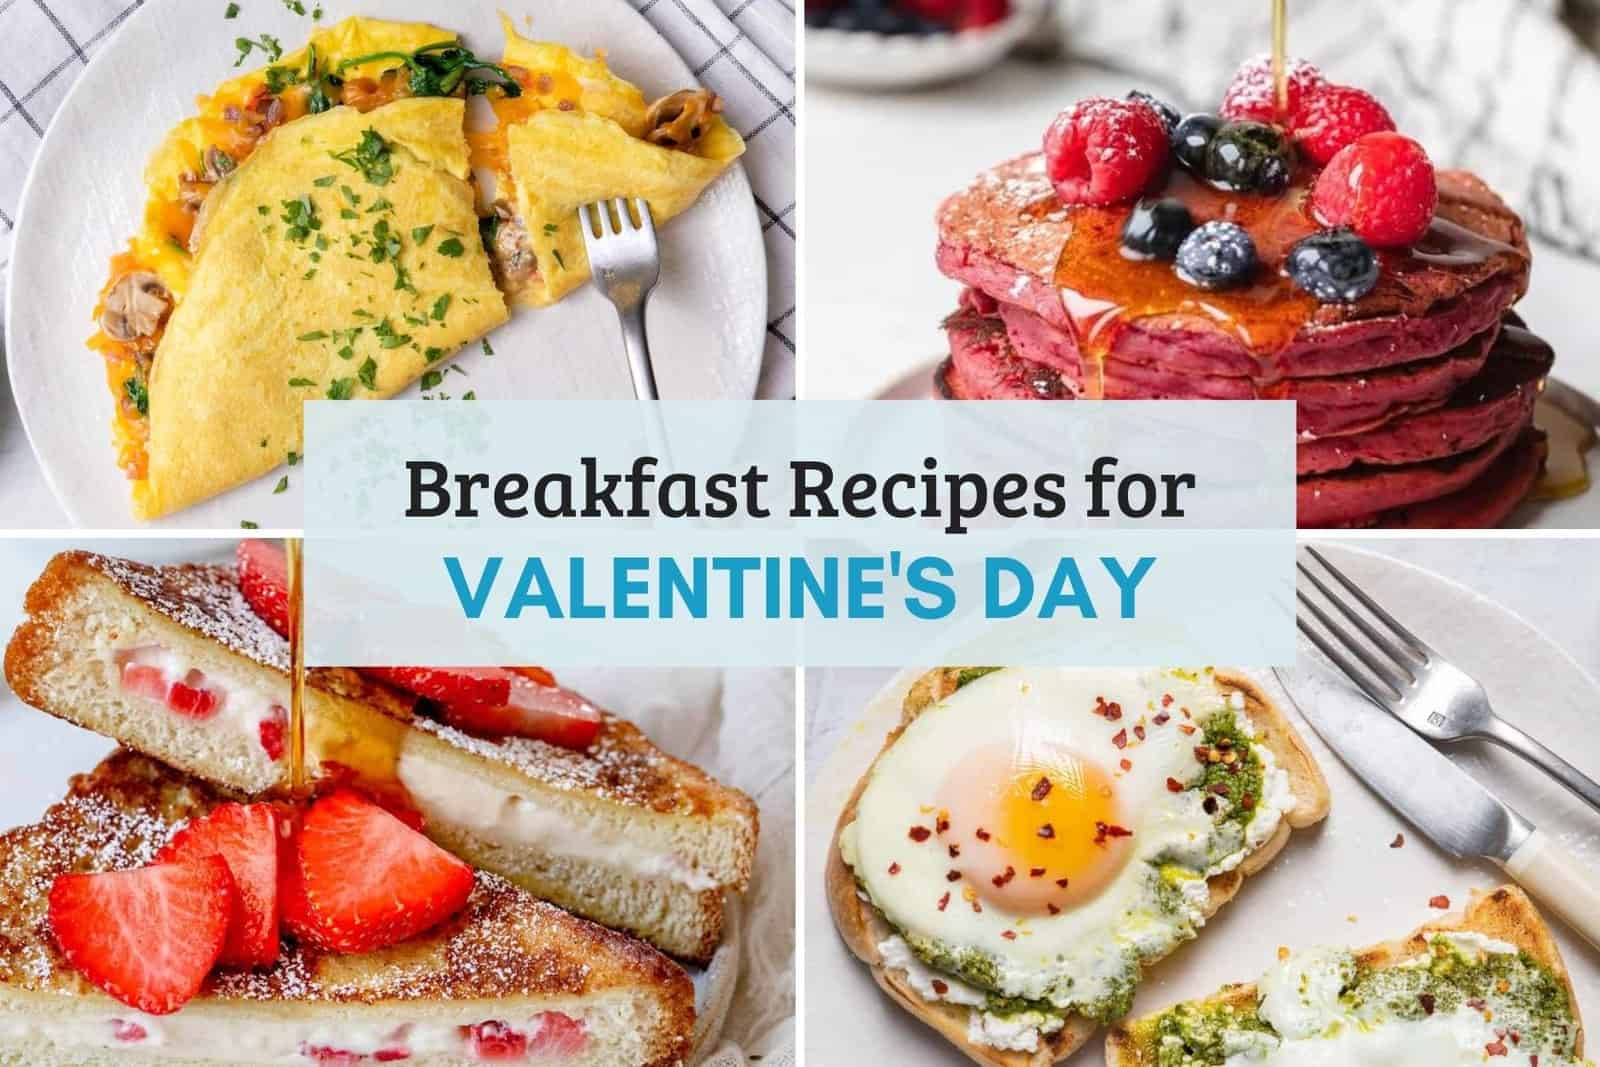 Round up image for Valentine's Day breakfast recipes.